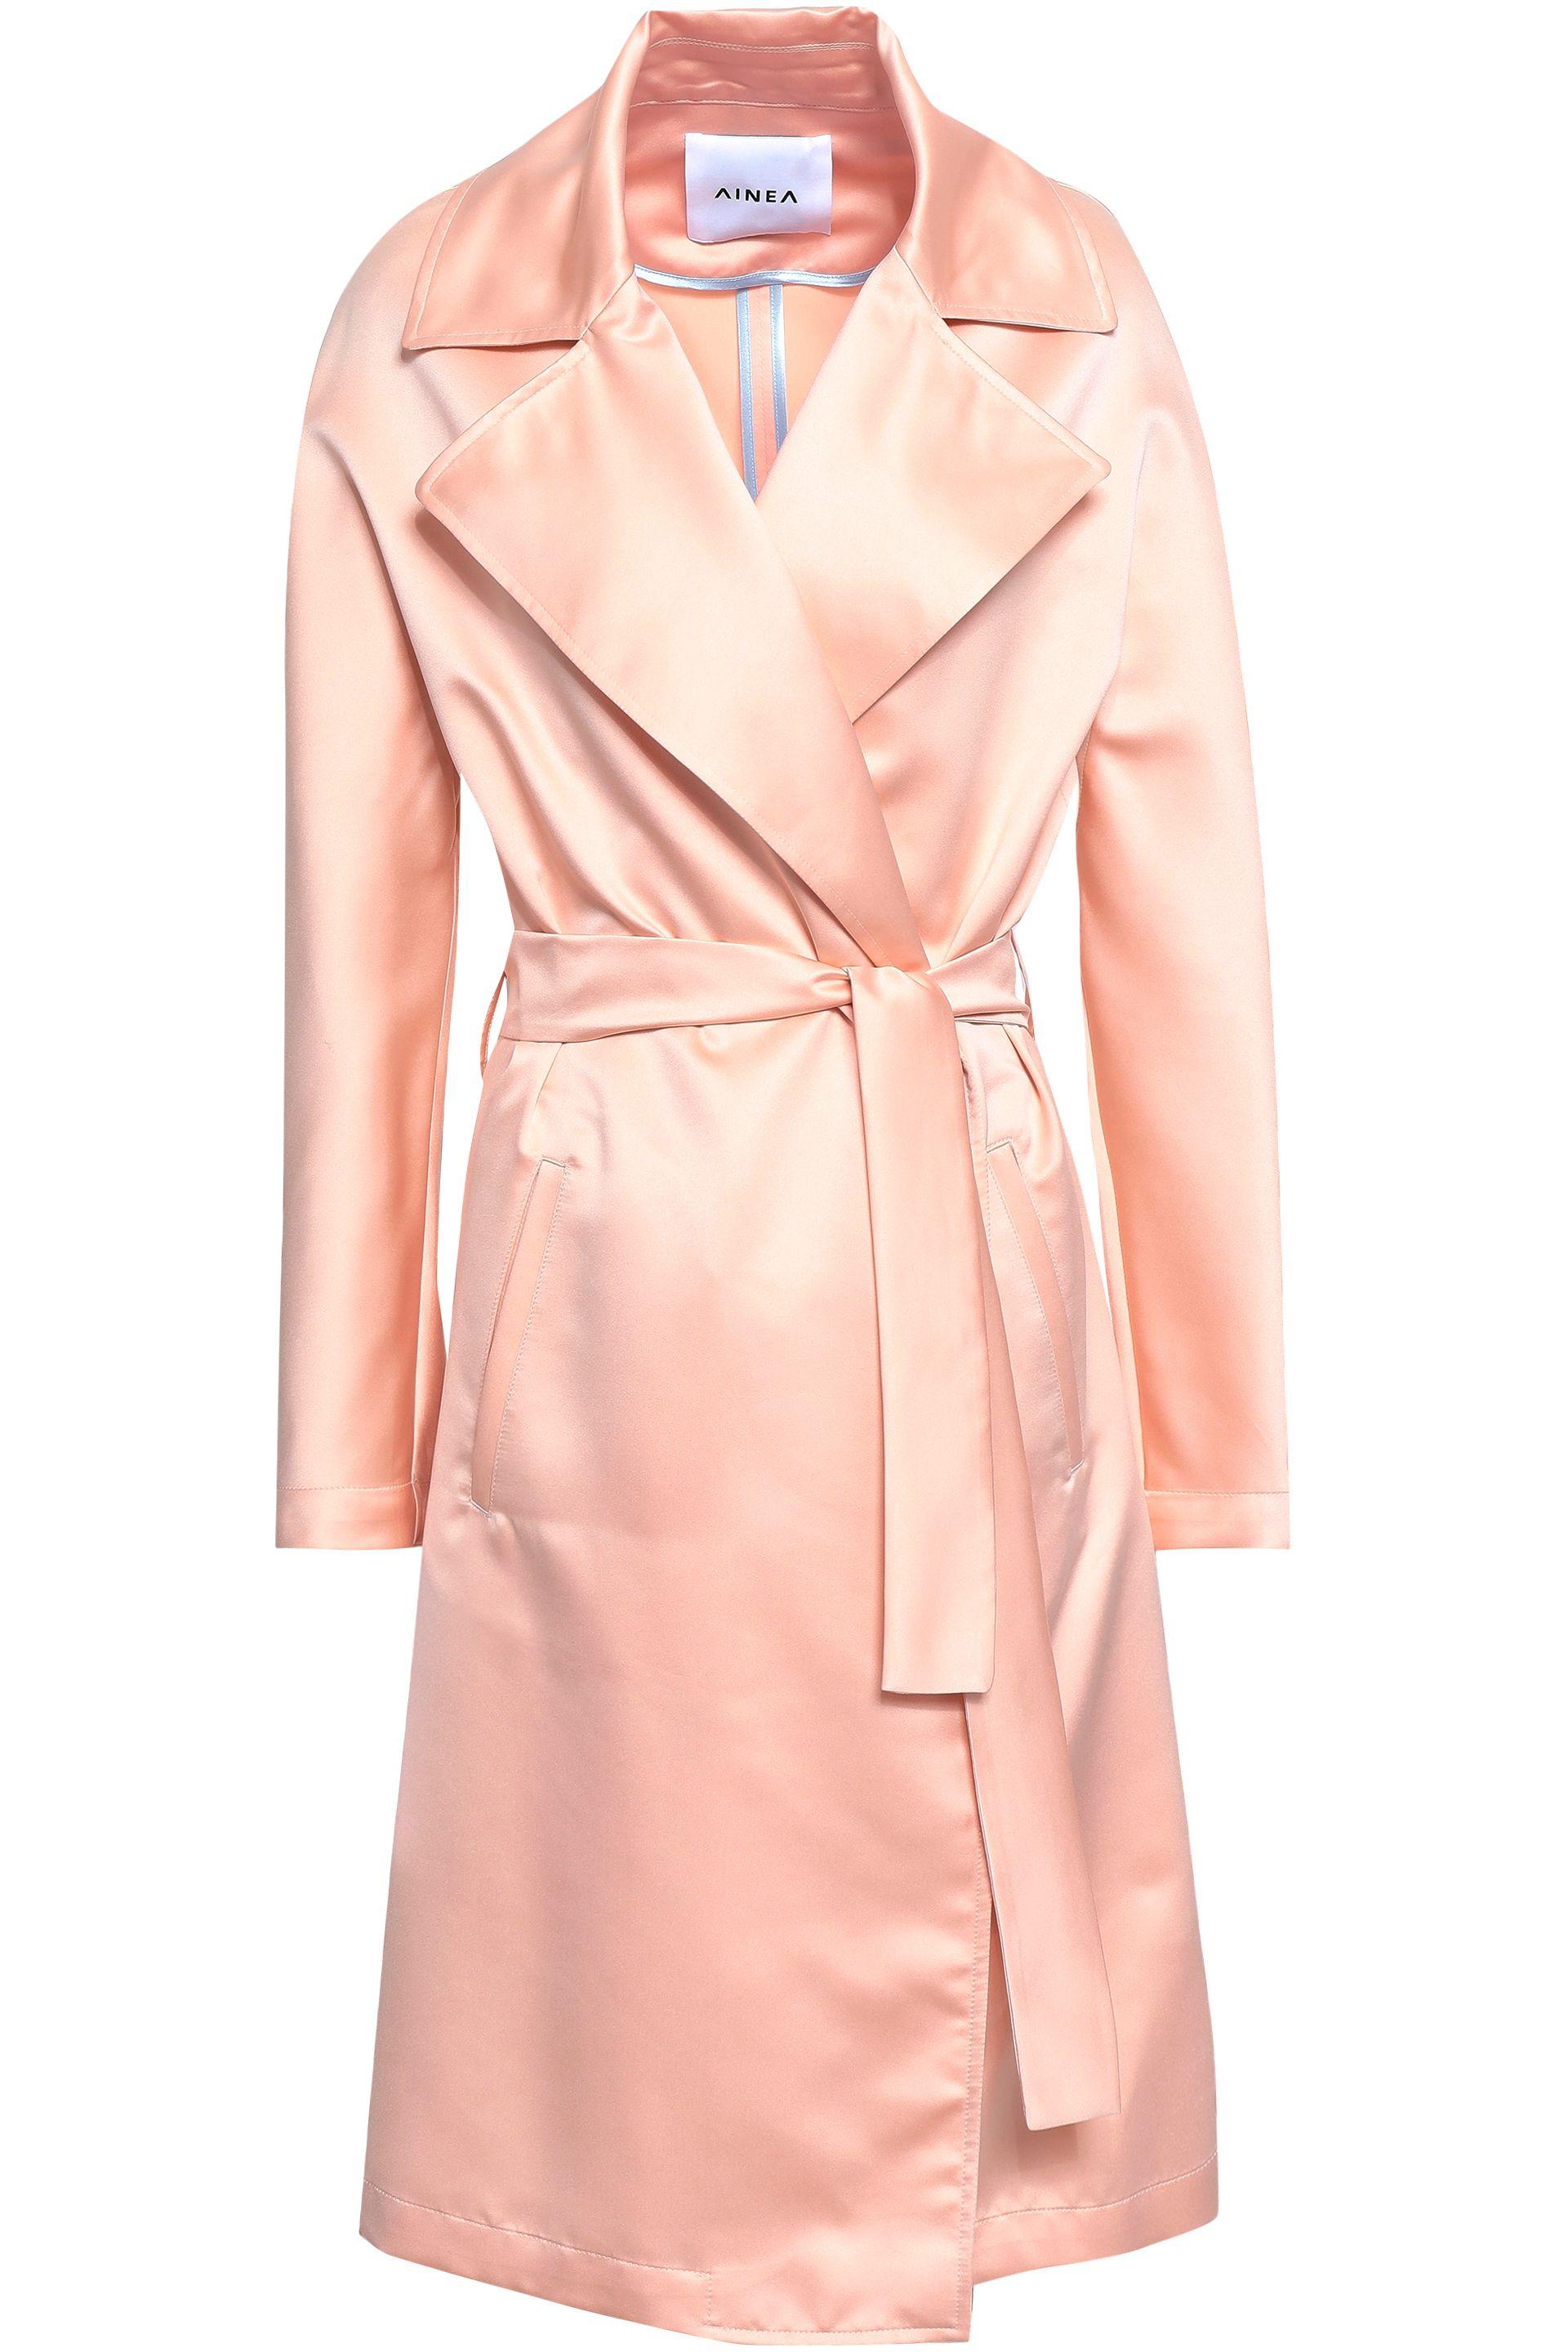 Ainea Belted Satin Trench Coat Peach in Pink - Lyst